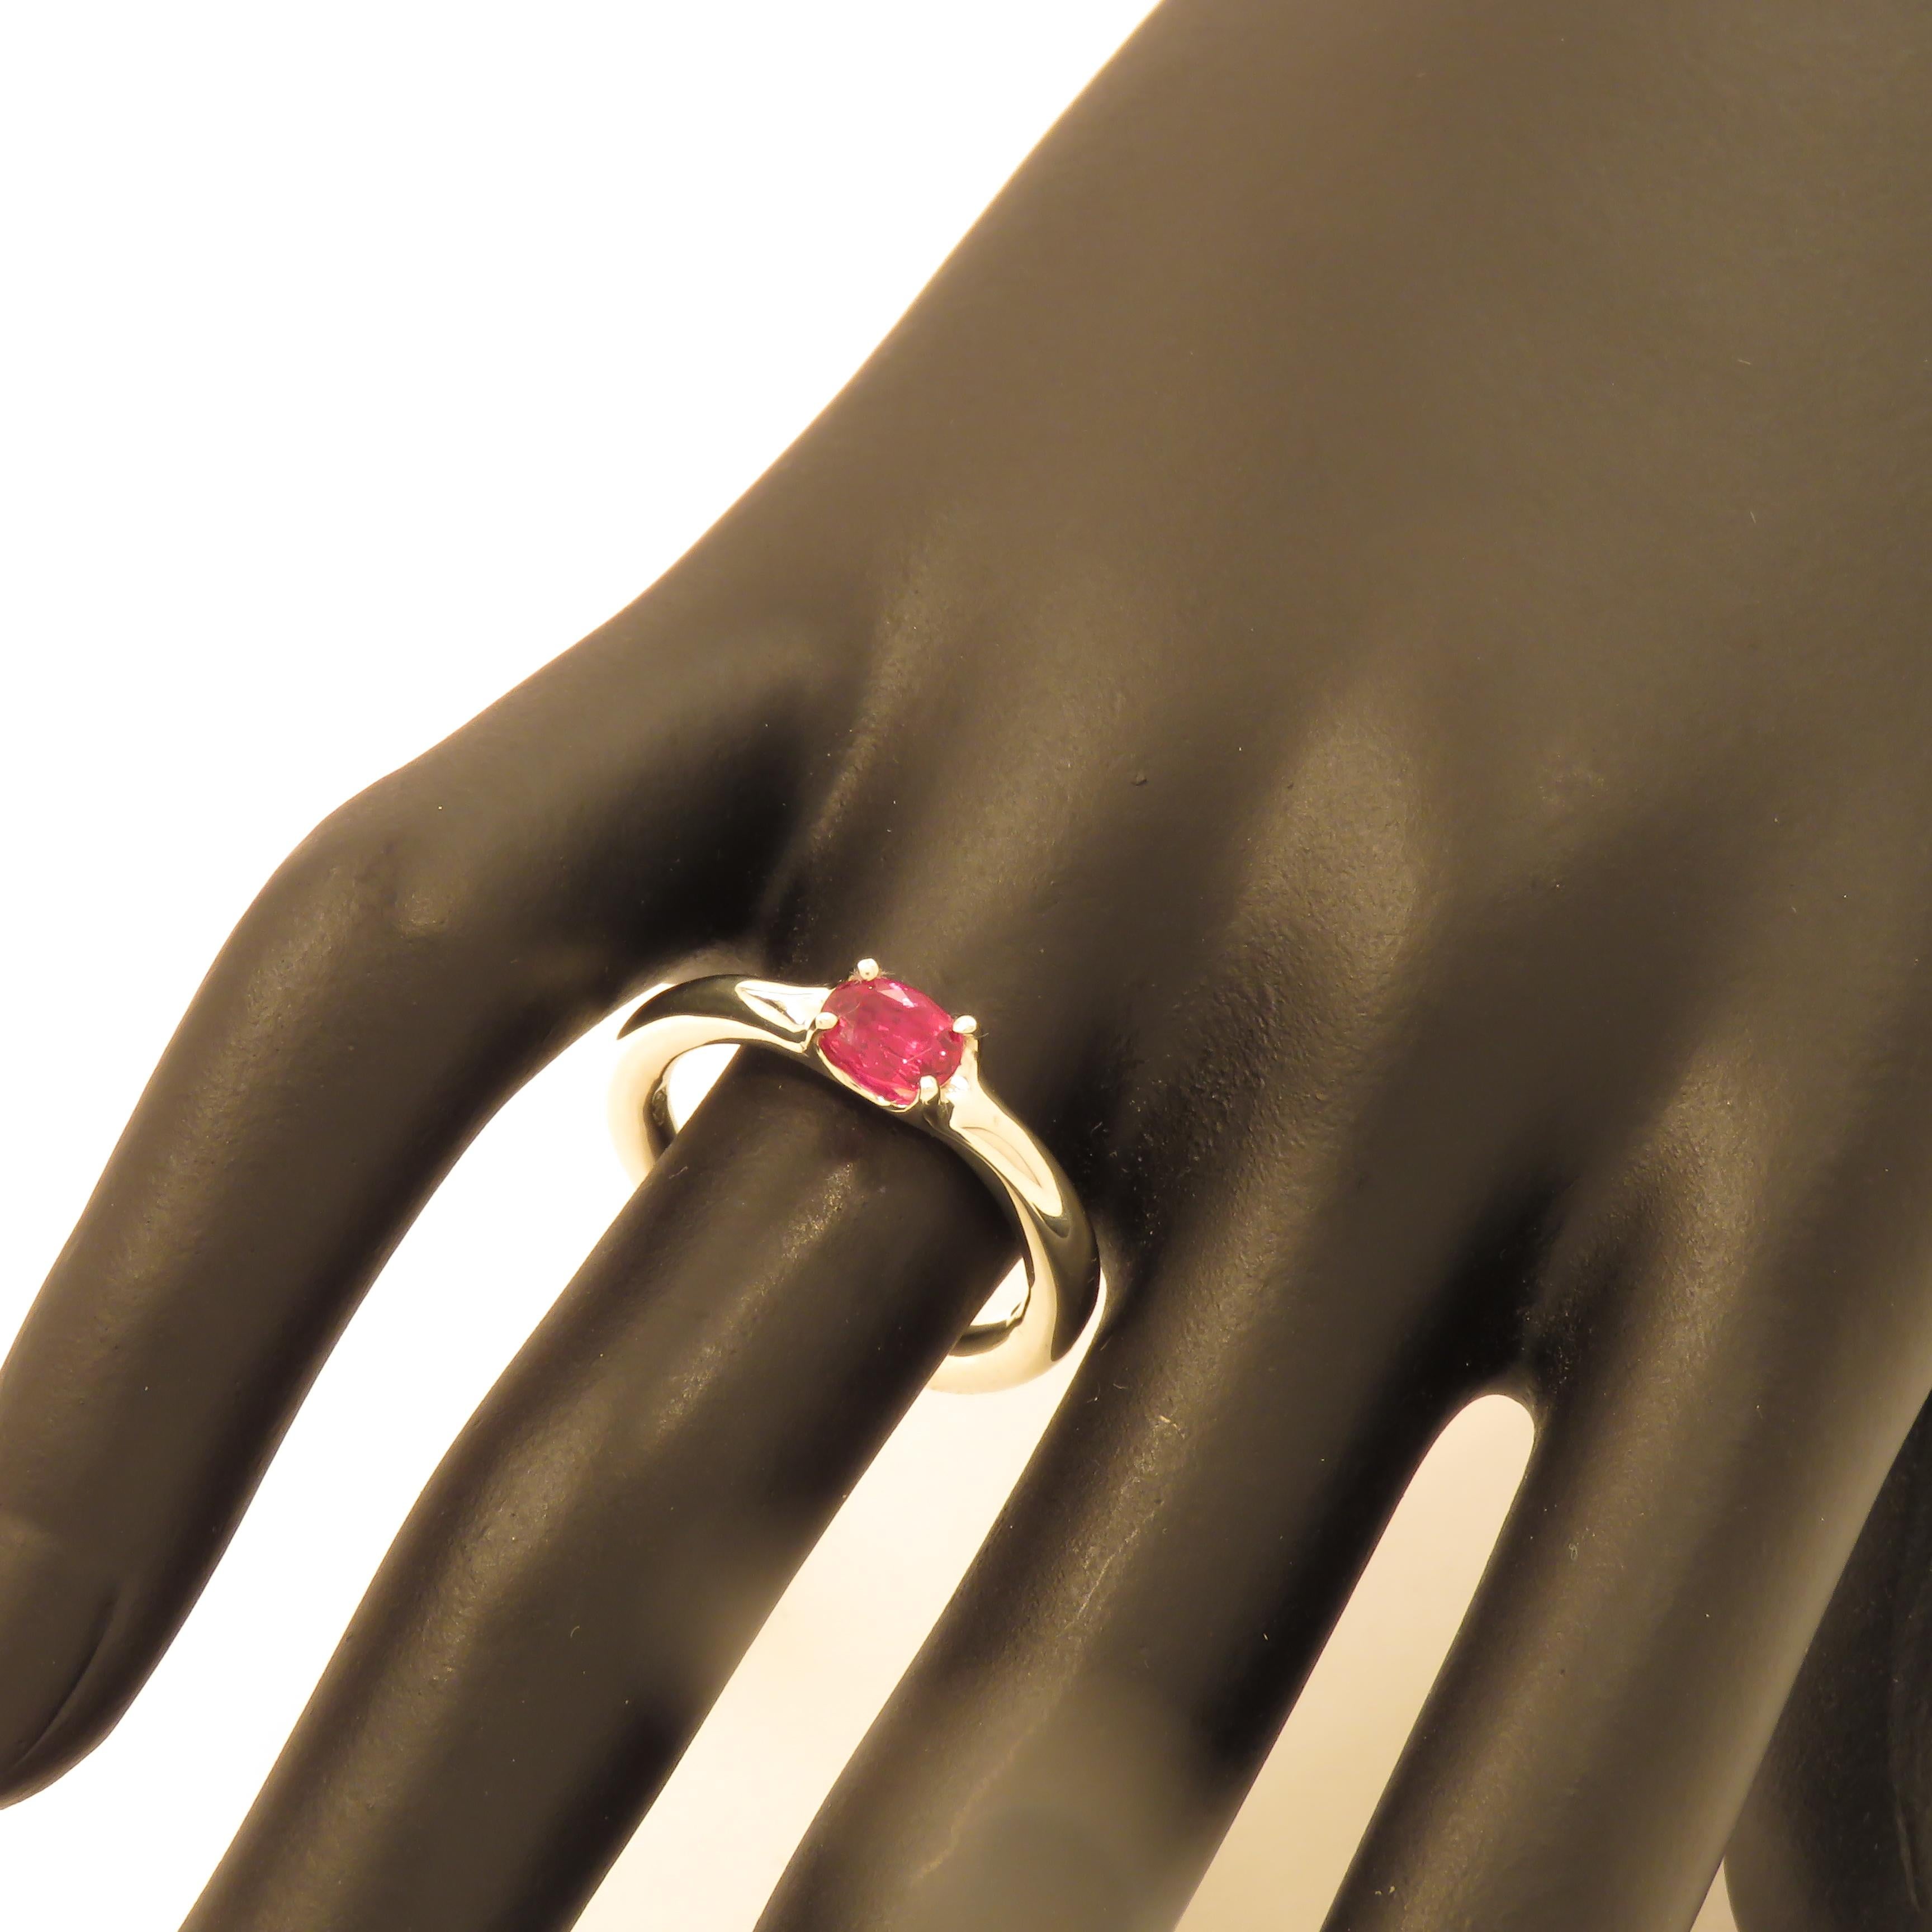 Very stylish modern band ring crafted in 9k white gold featuring at the centre a oval cut natural ruby weighing 0.60 ctw. The dimension of the gemstone is 4.20x5.80 millimeters / 0.188x0.228 inches. Us finger size is 6.5 / Italian size 13 / French